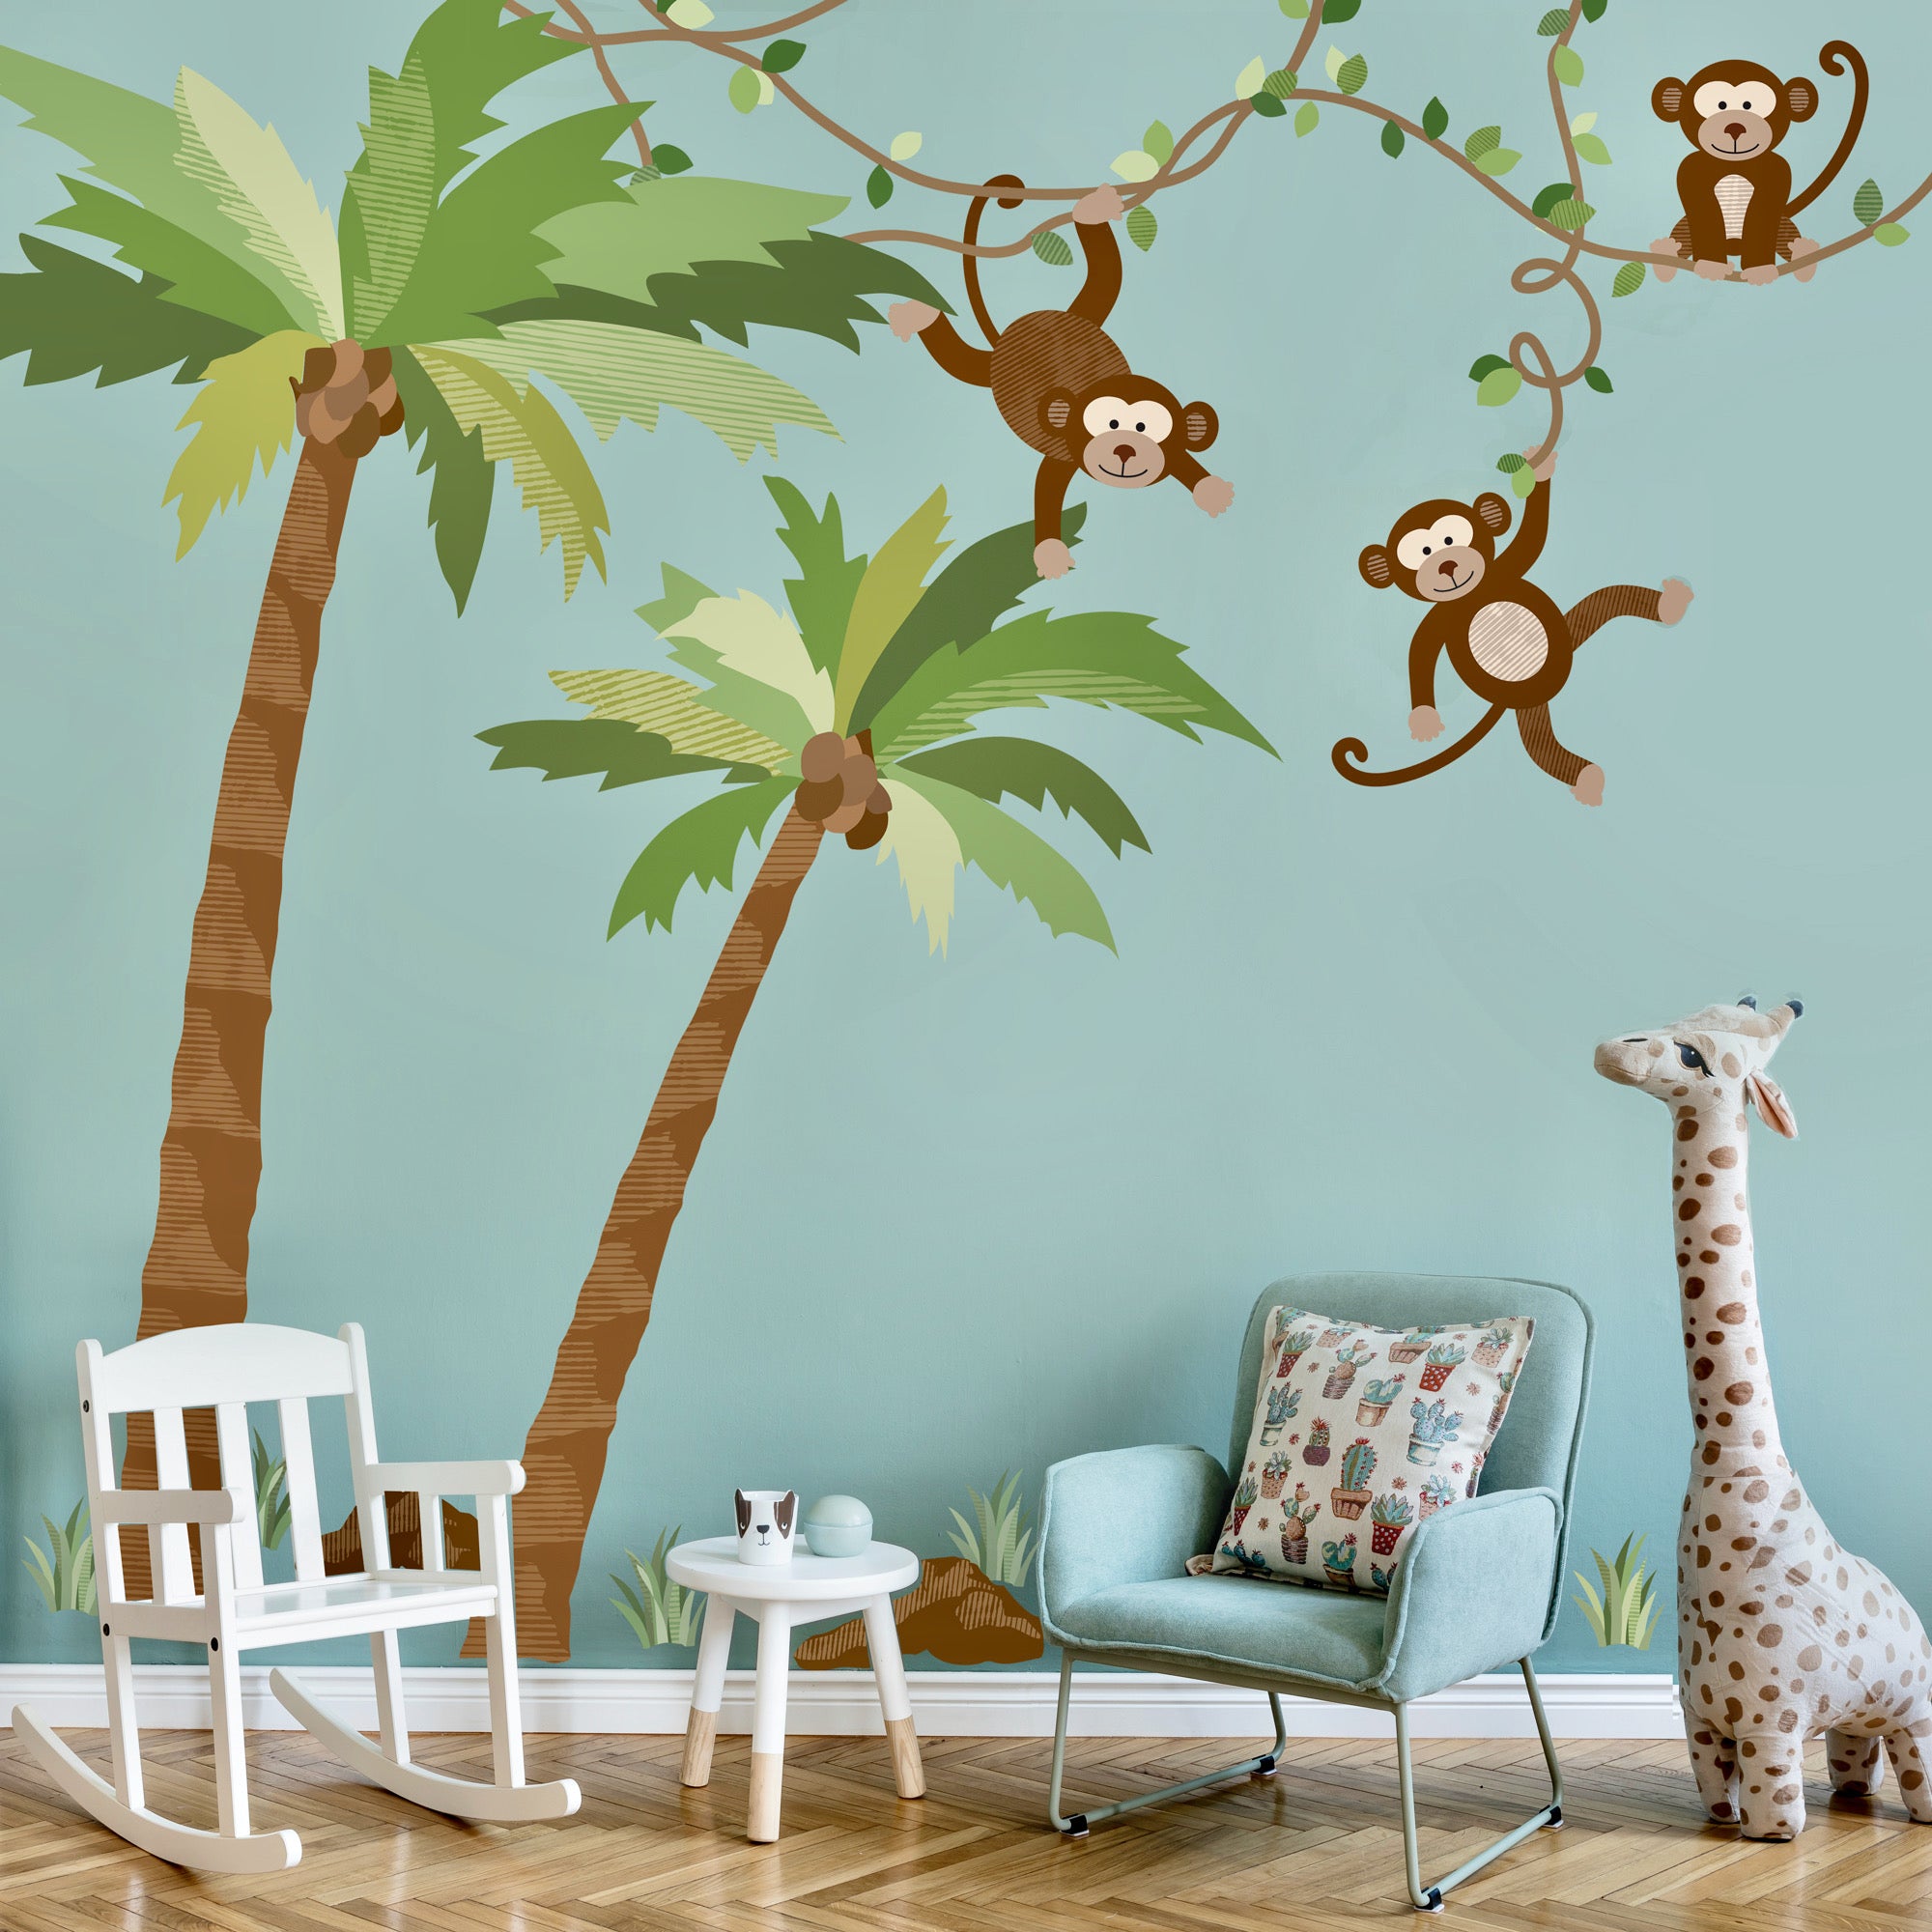 Large Monkey Wall Decals on Vines Palm Tree Wall Decals Nursery Wall D